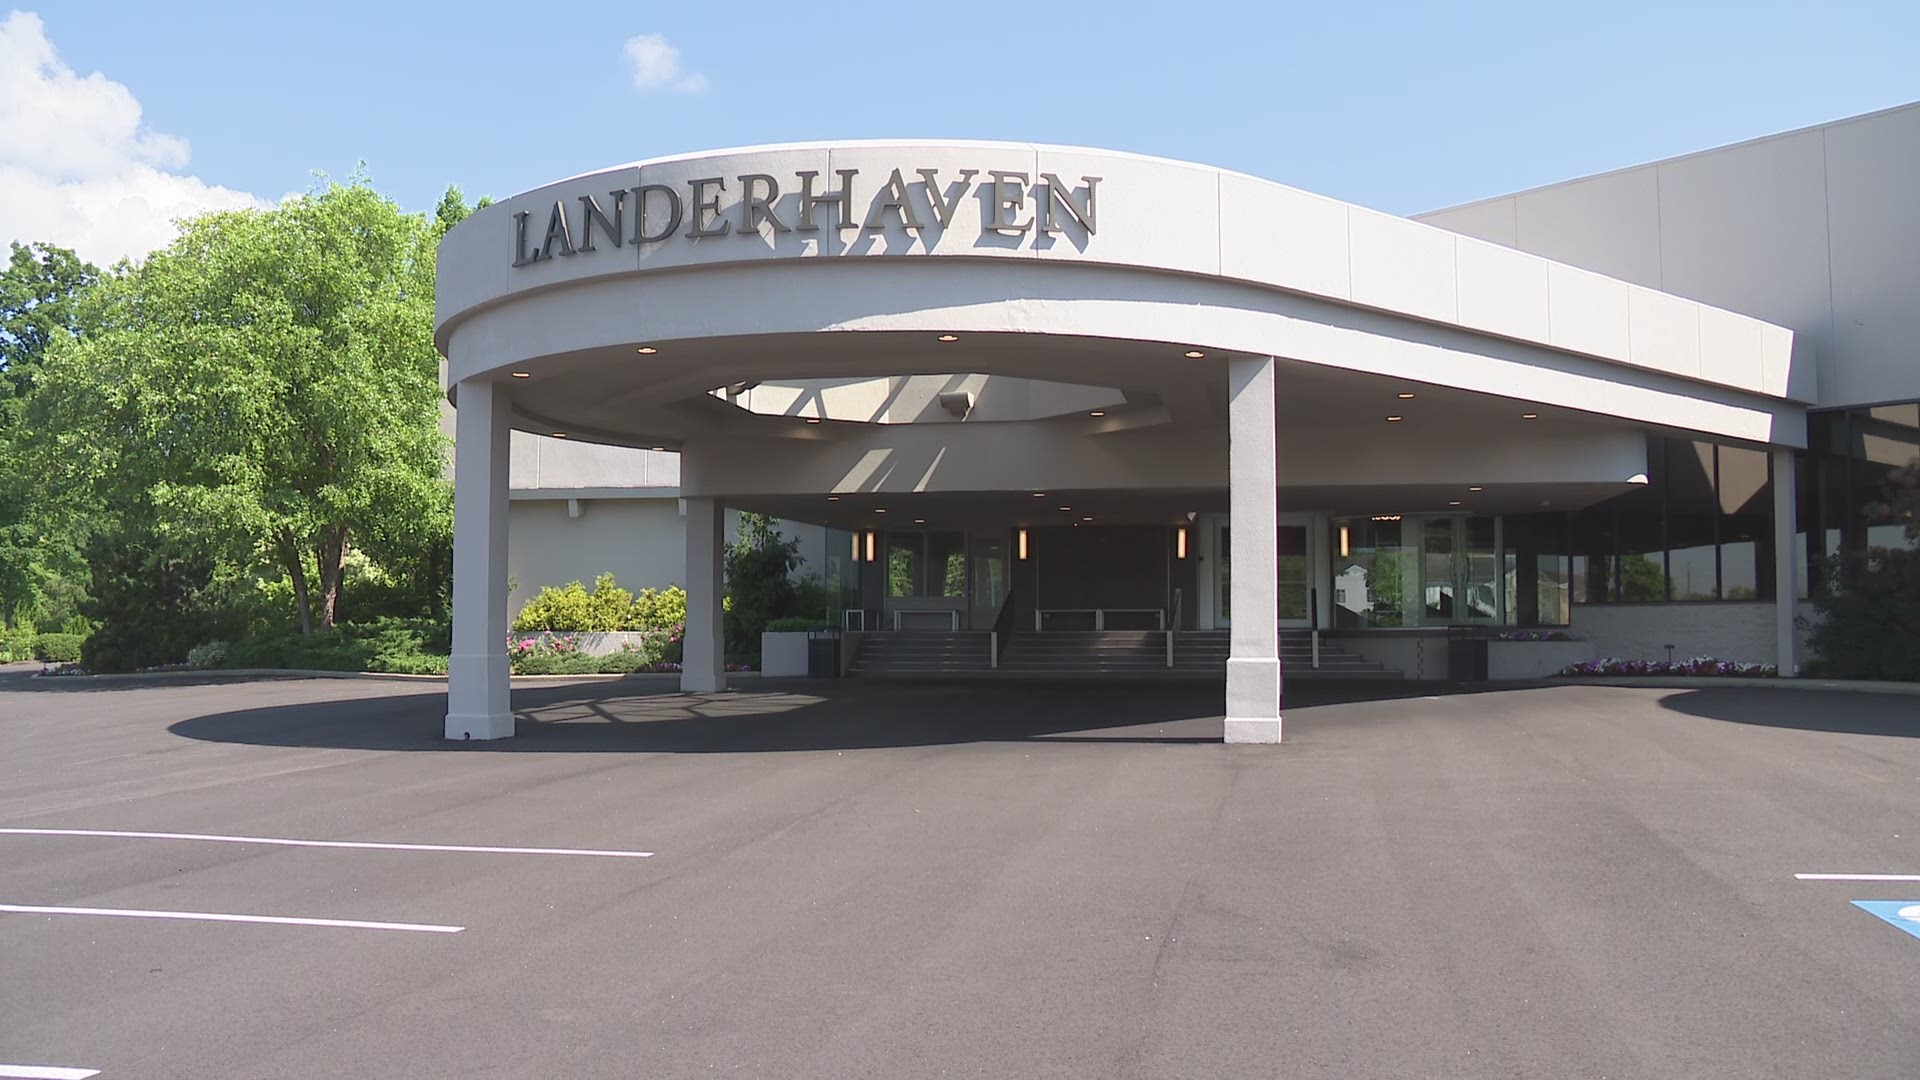 An iconic Northeast Ohio venue got a makeover. Here's a look at Landerhaven's new remodel.